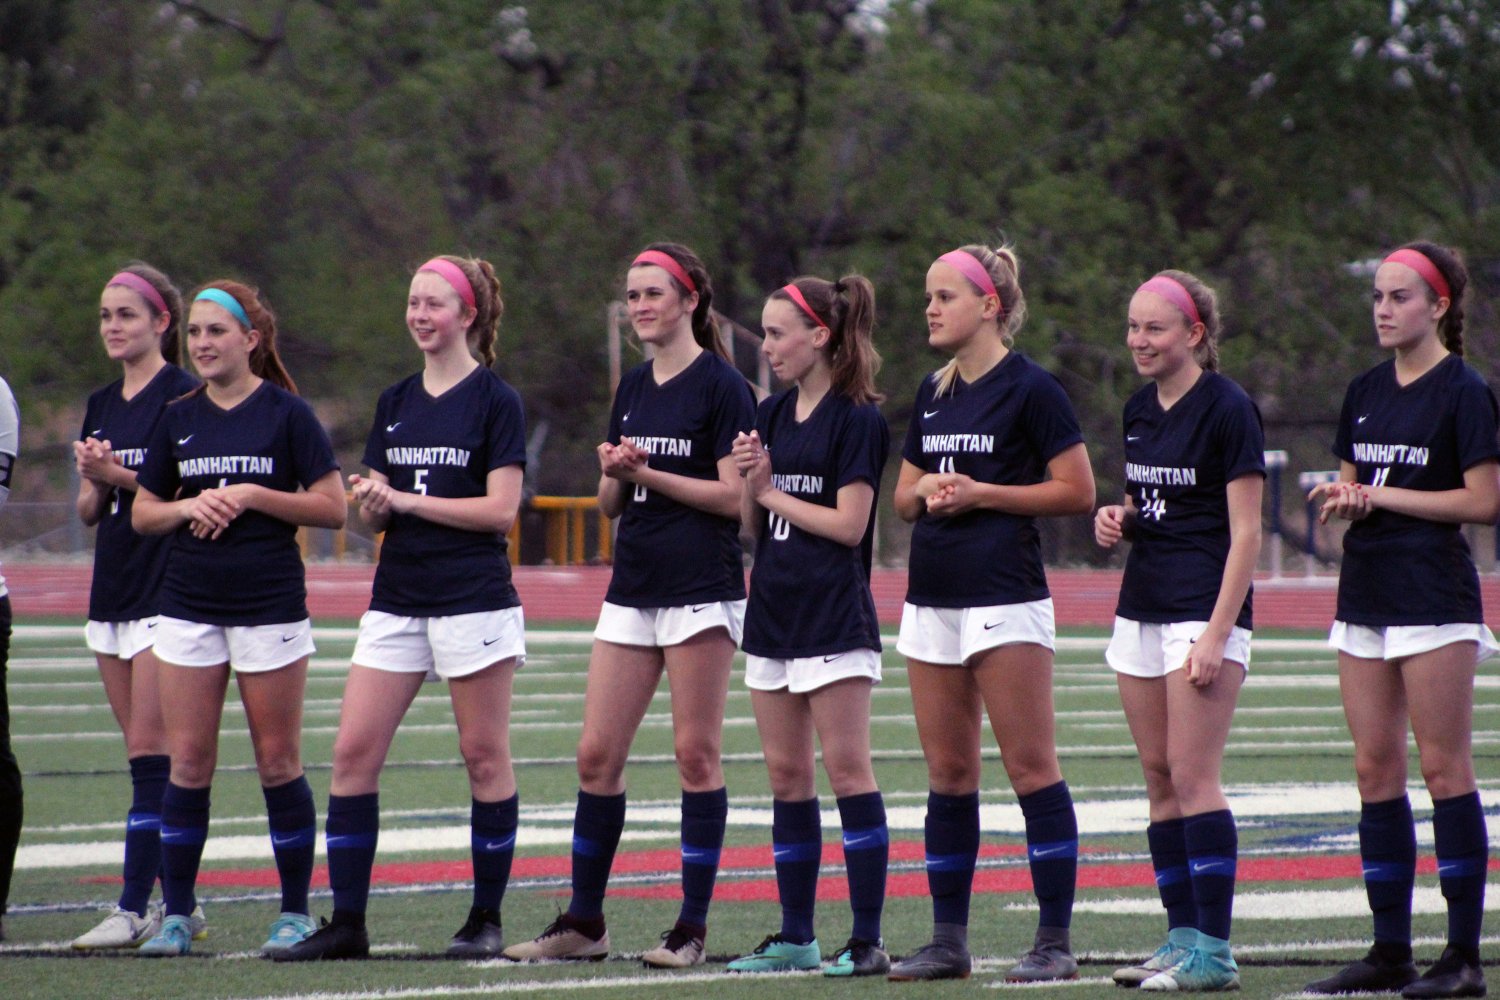 The girls soccer team gets announced before their game on Tuesday evening, April 23rd.